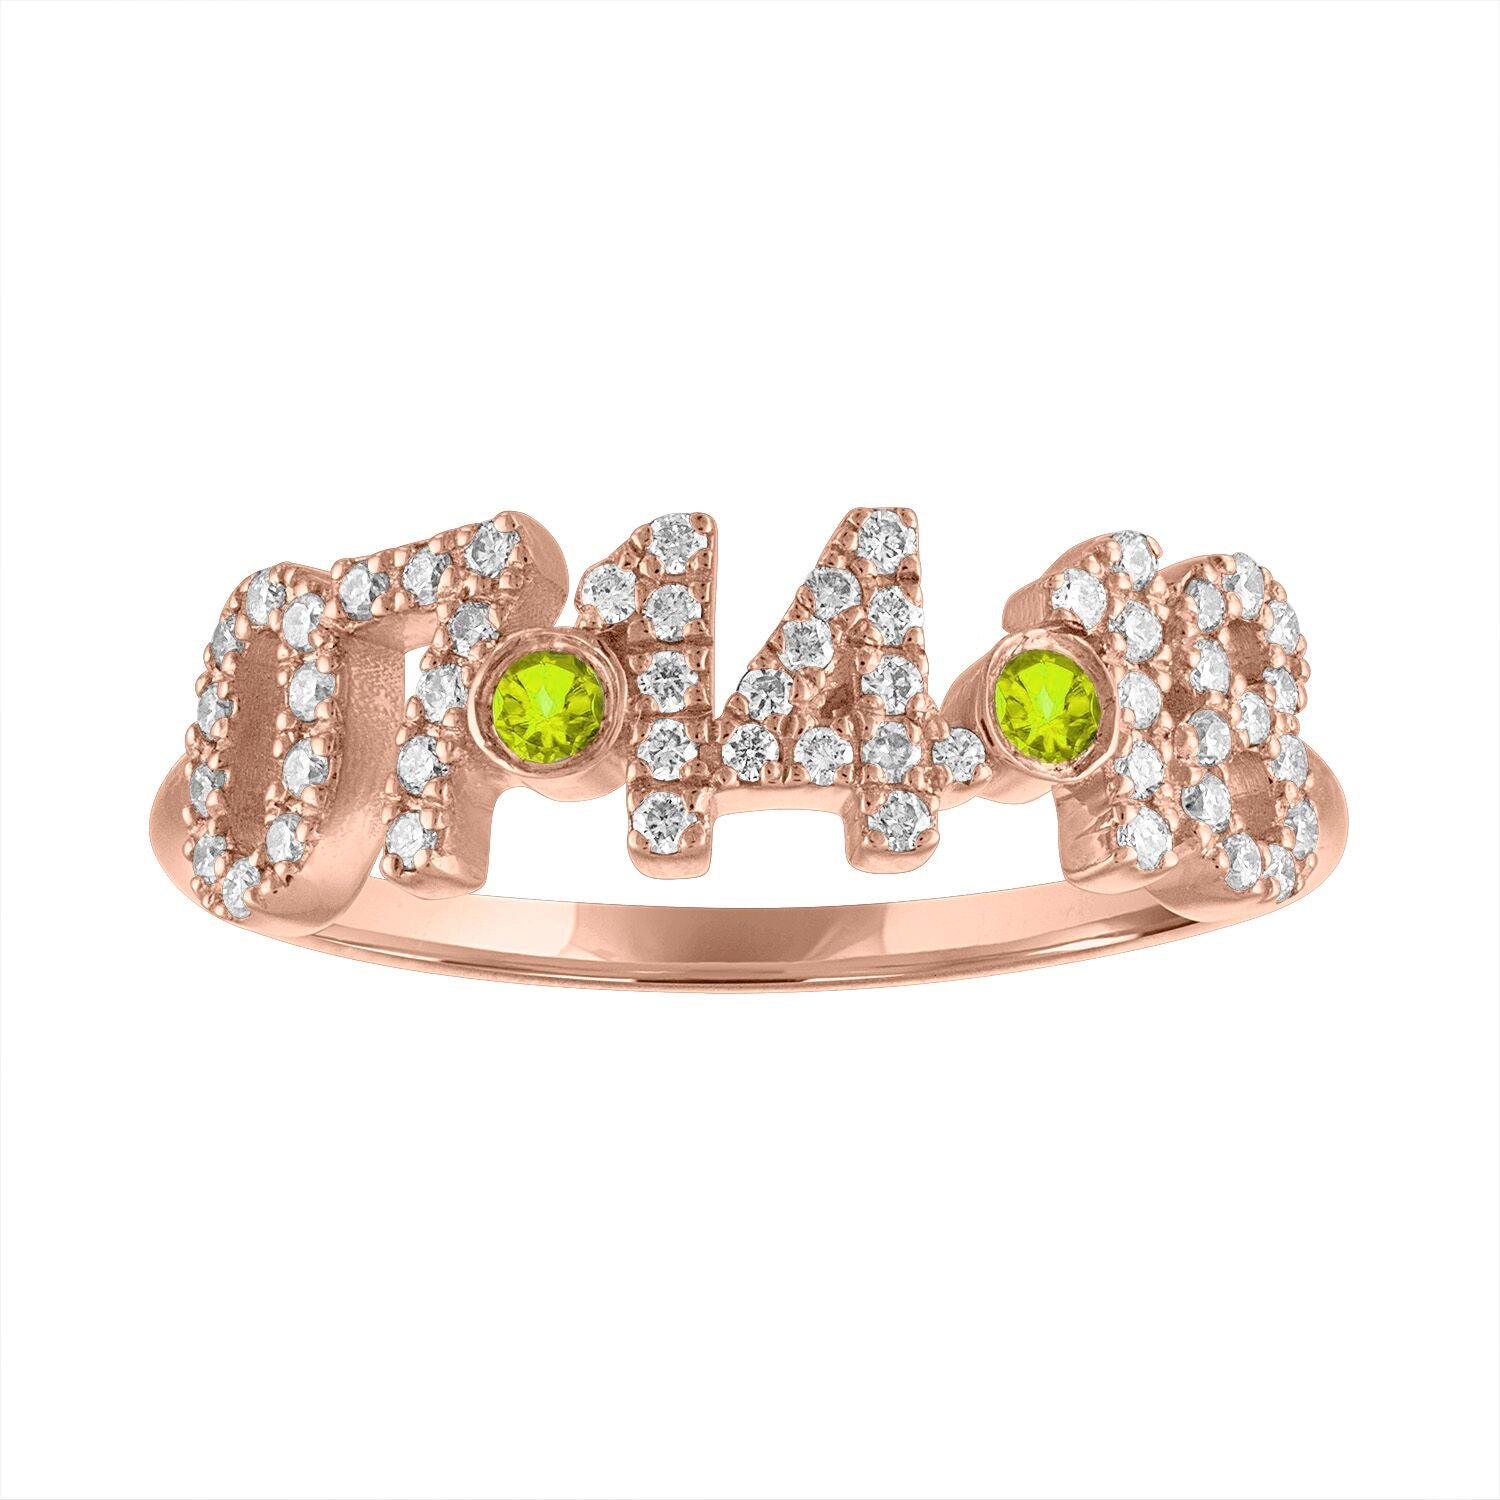 Pave Date Ring